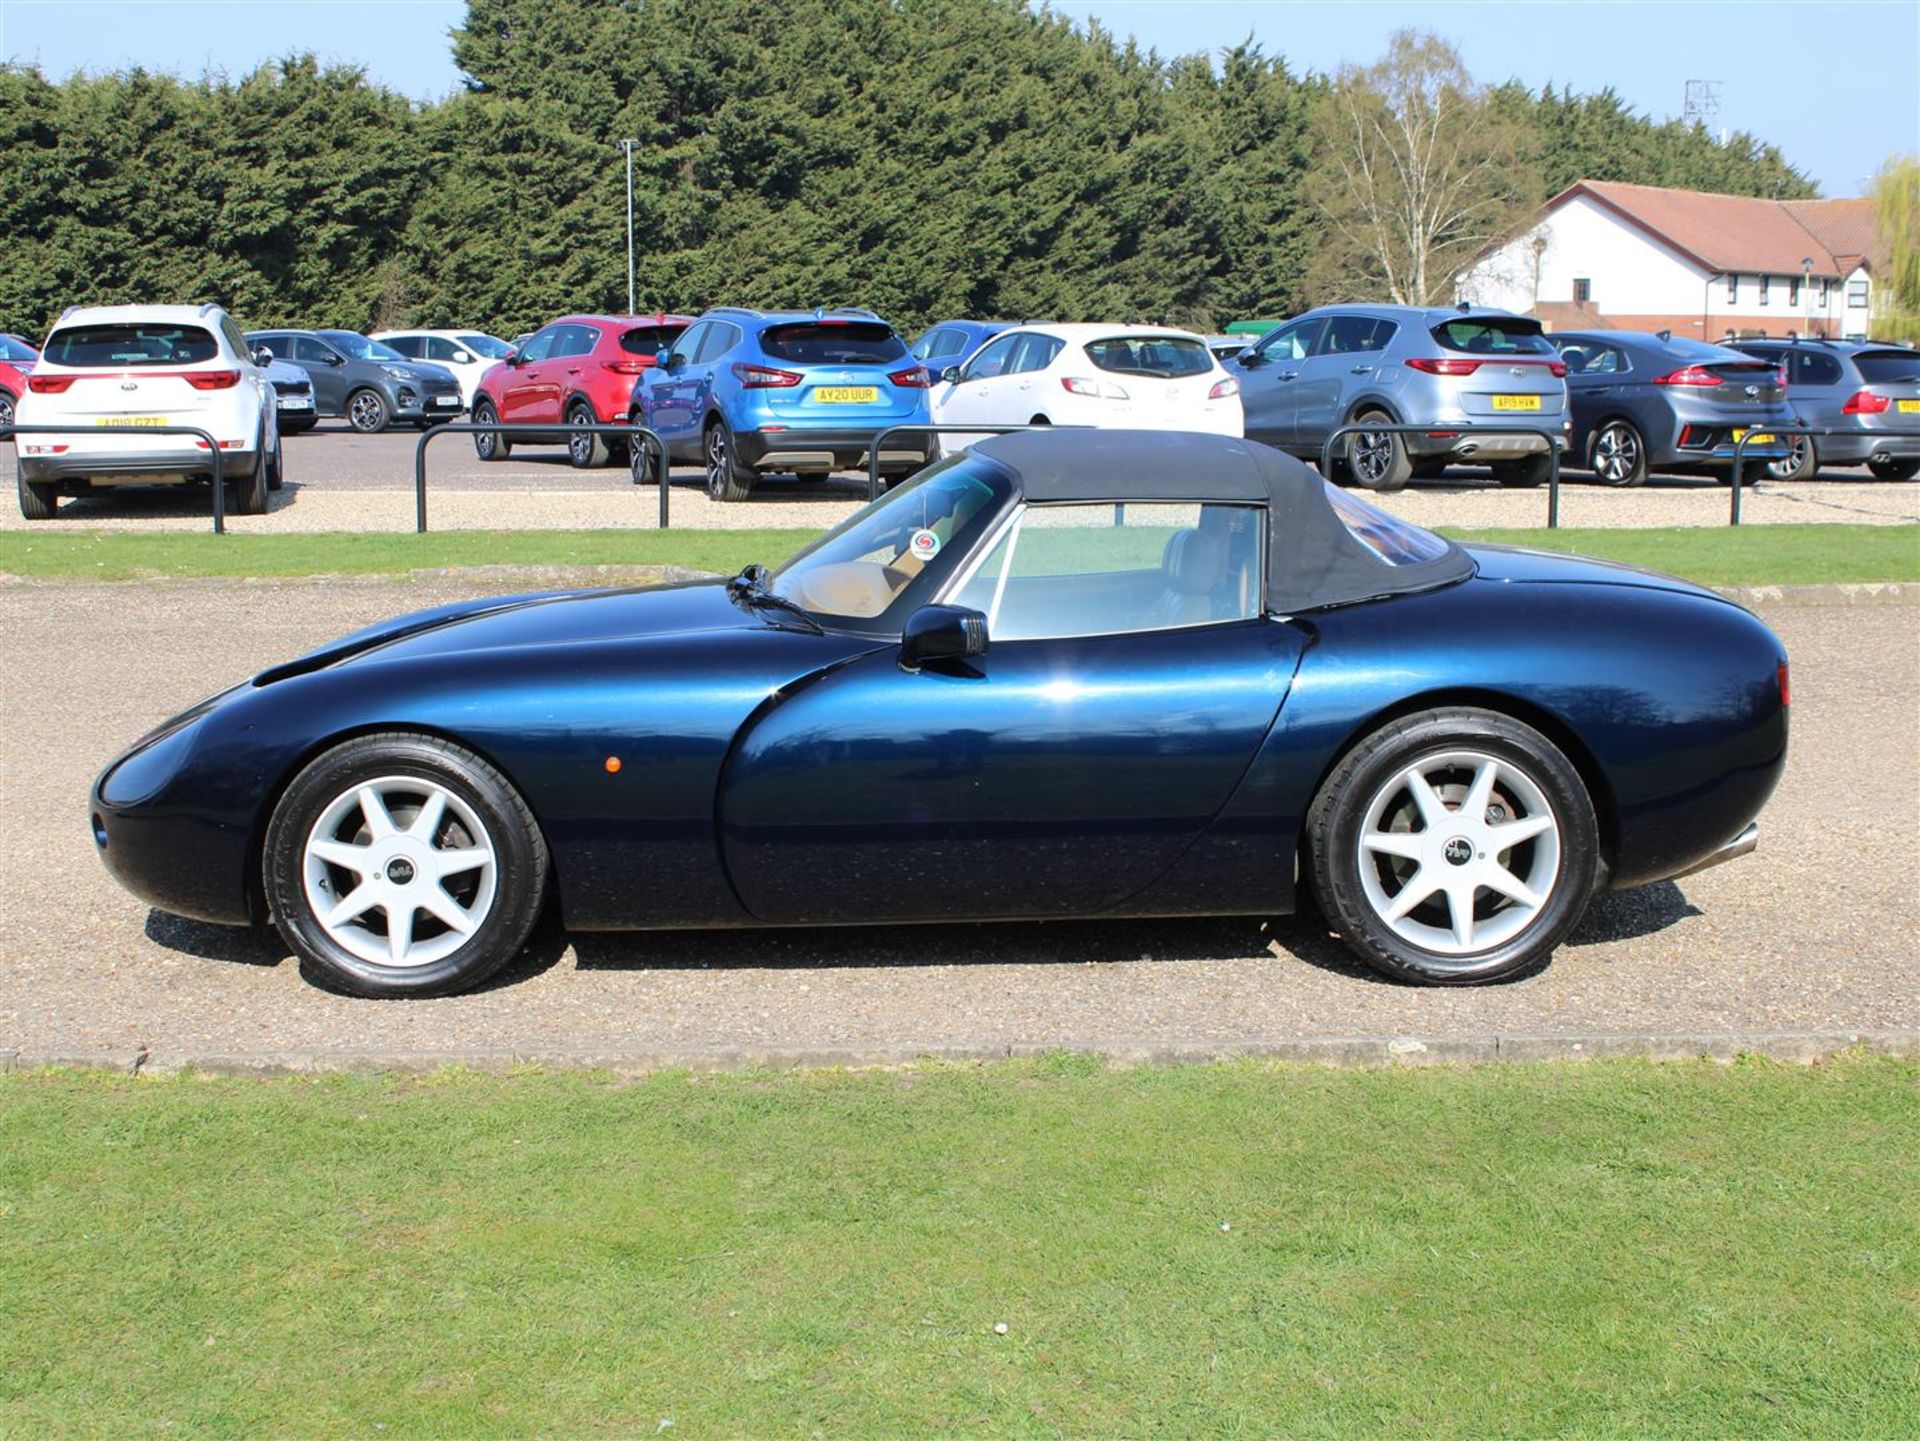 1993 TVR Griffith 500 - Image 3 of 19